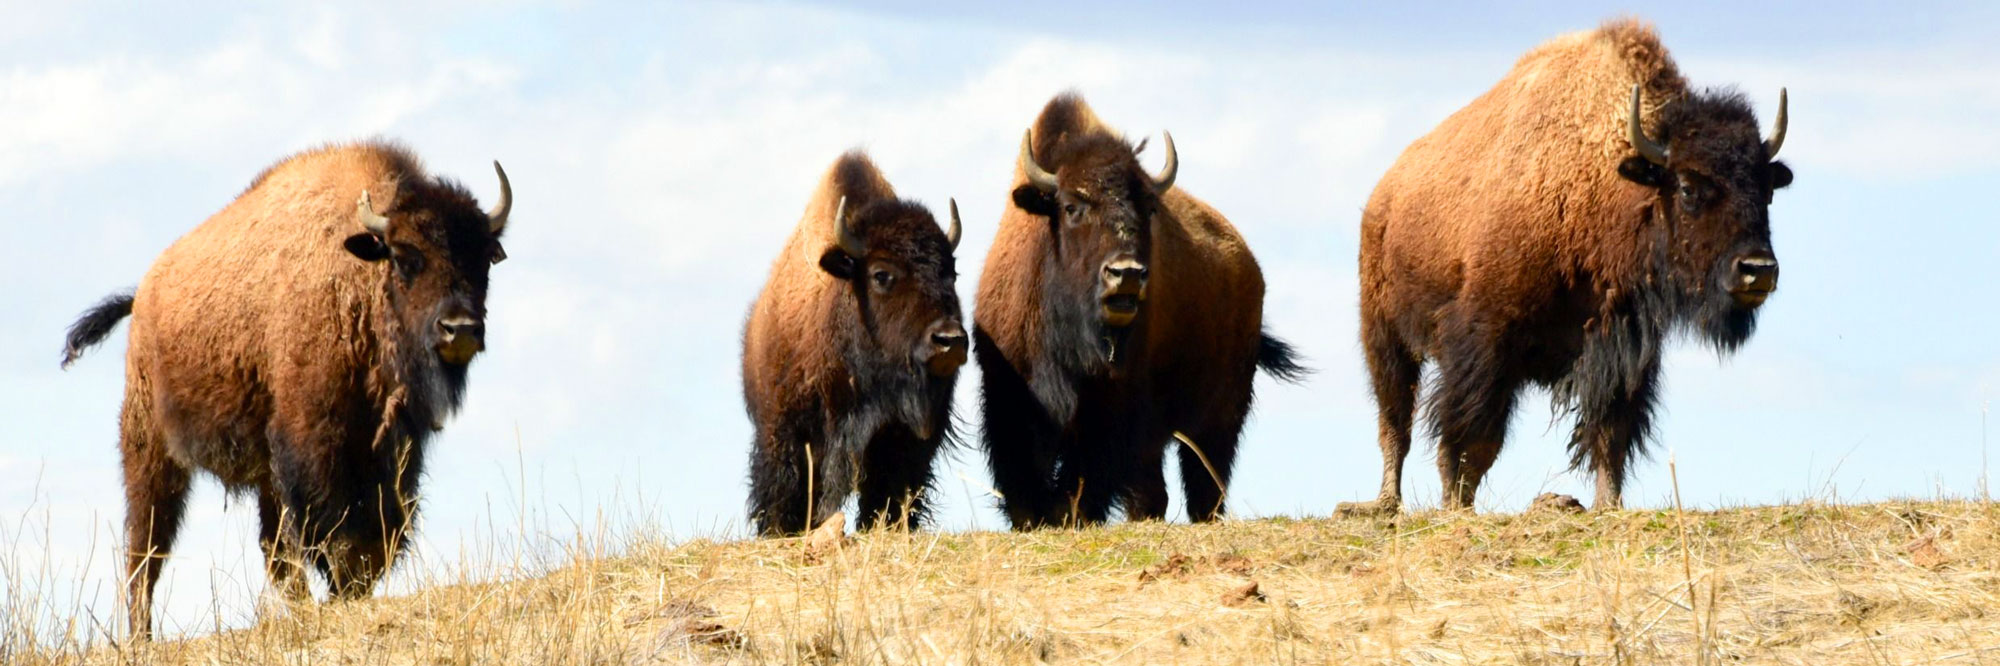 group-of-bison-on-hill-banner